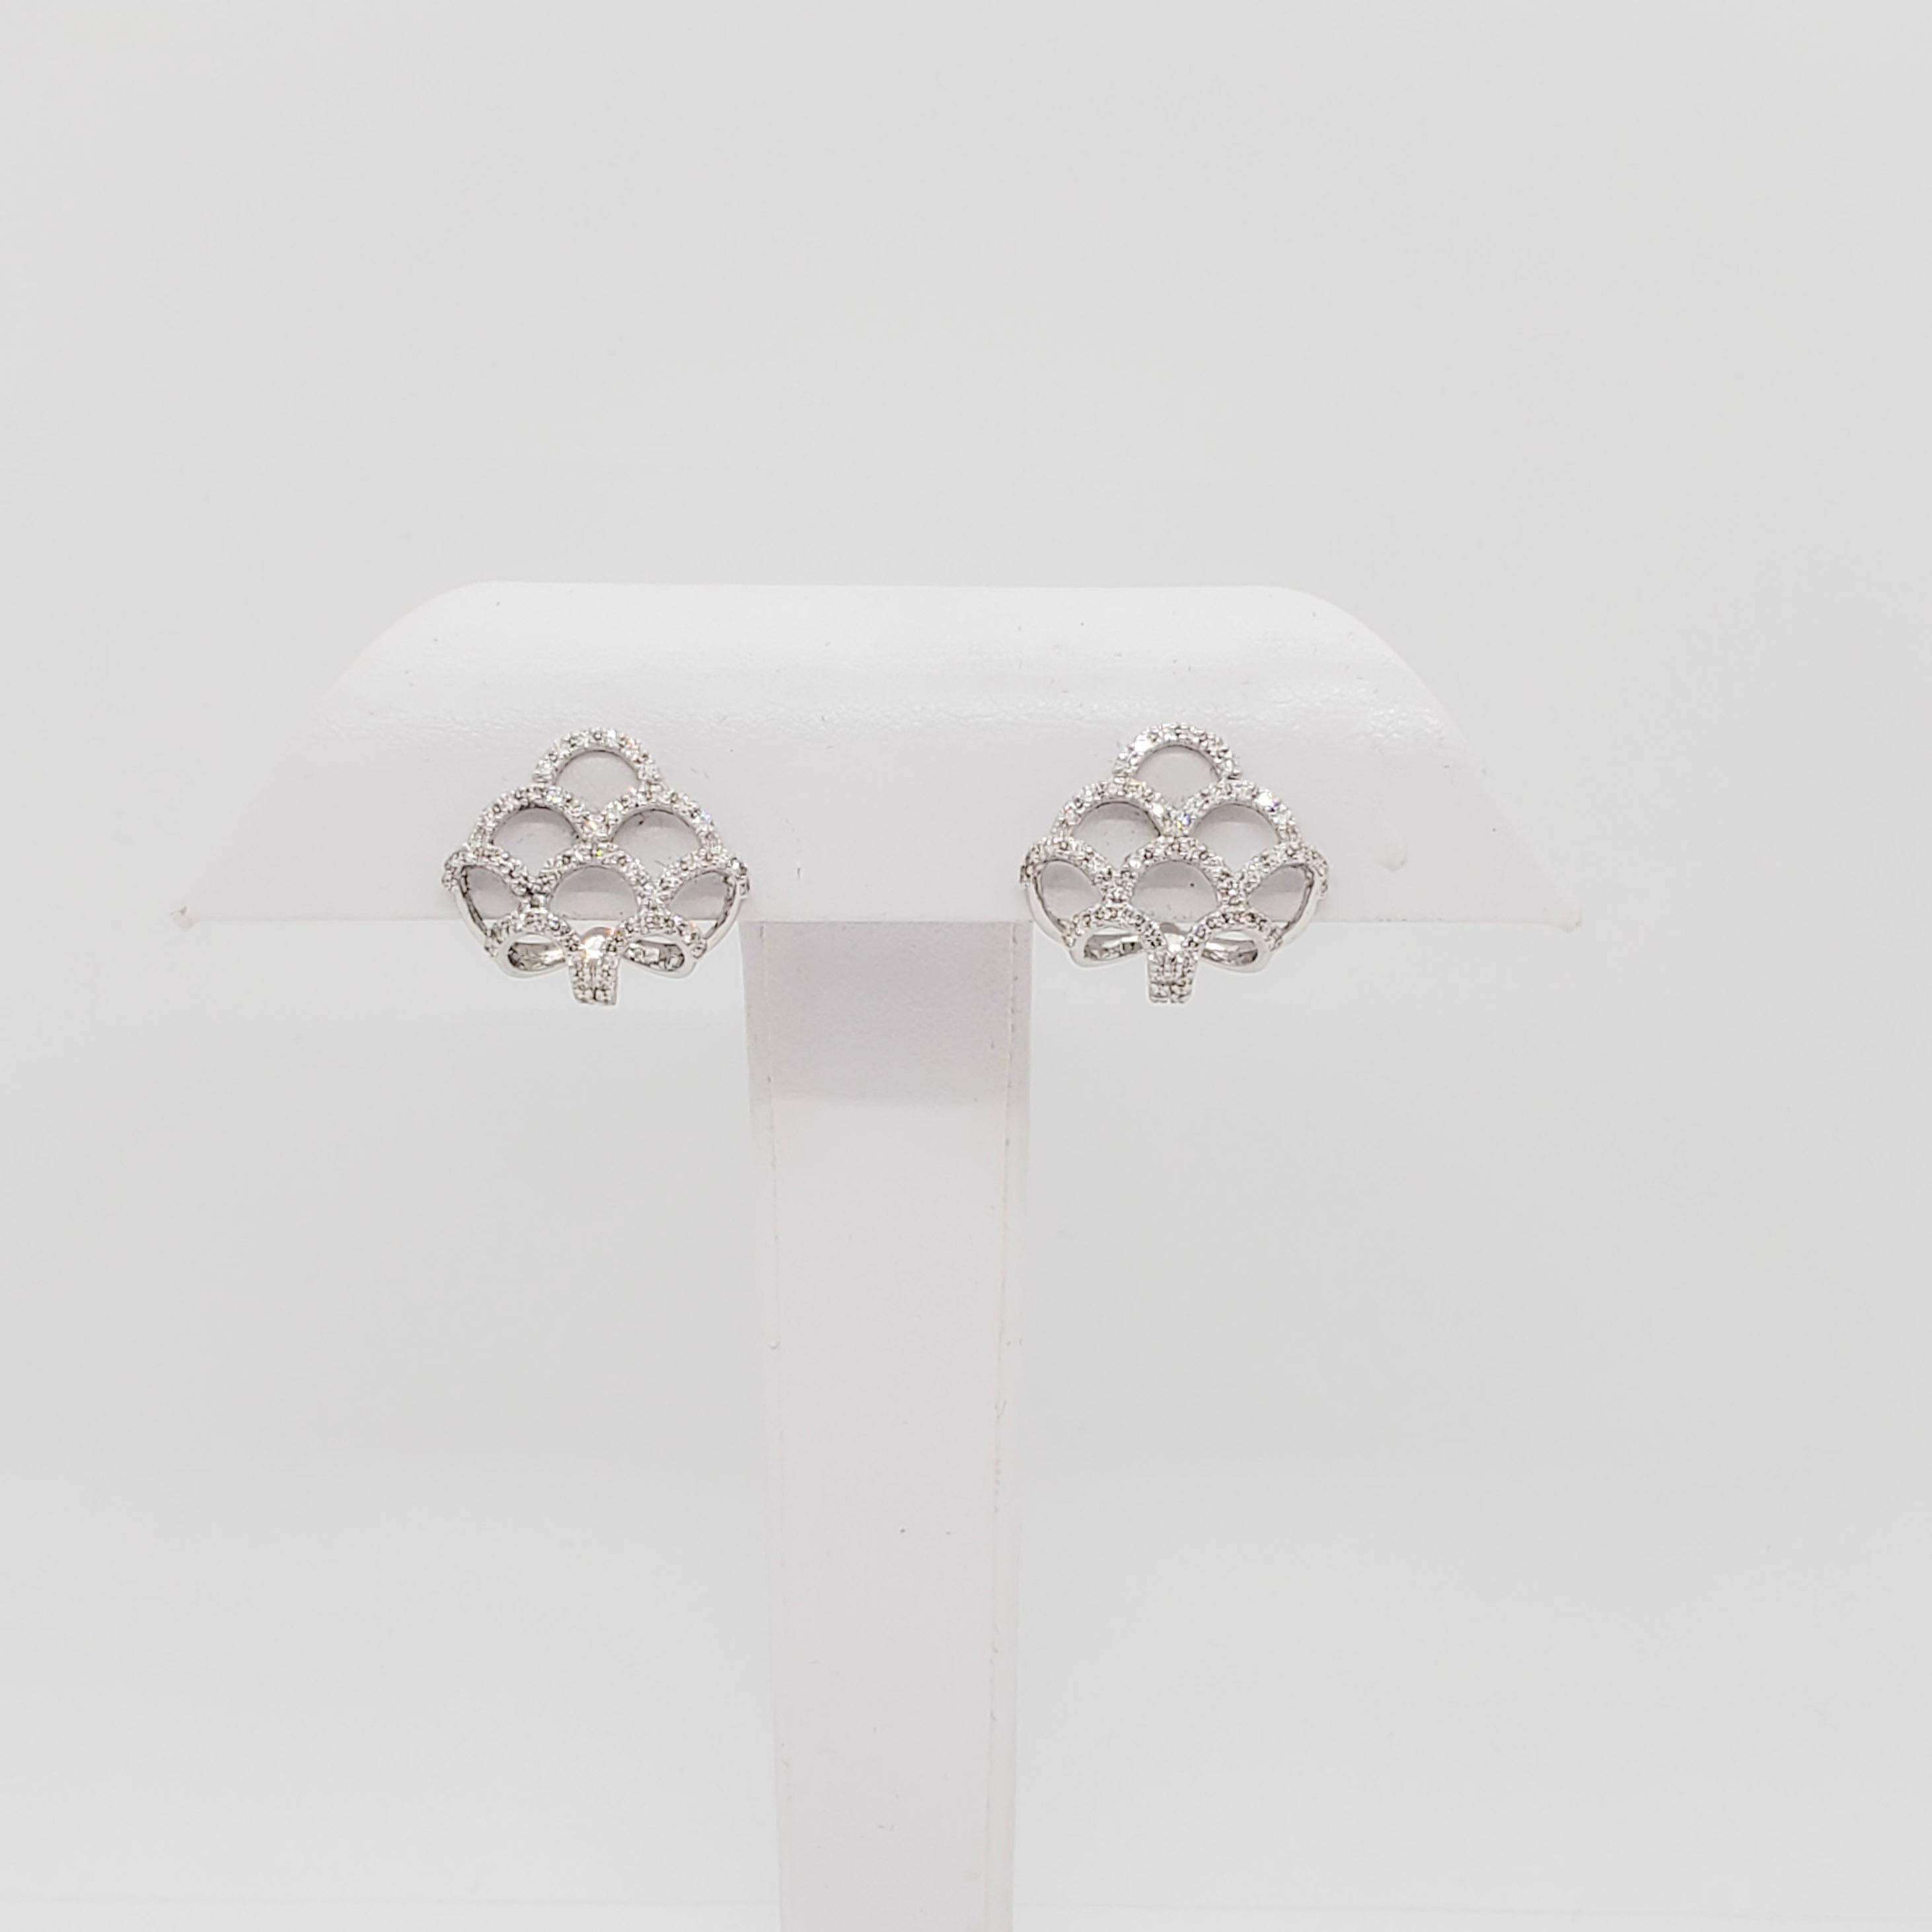 Beautiful earrings with 1.03 ct. good quality, white, and bright diamond rounds in handmade 18k white gold mountings.